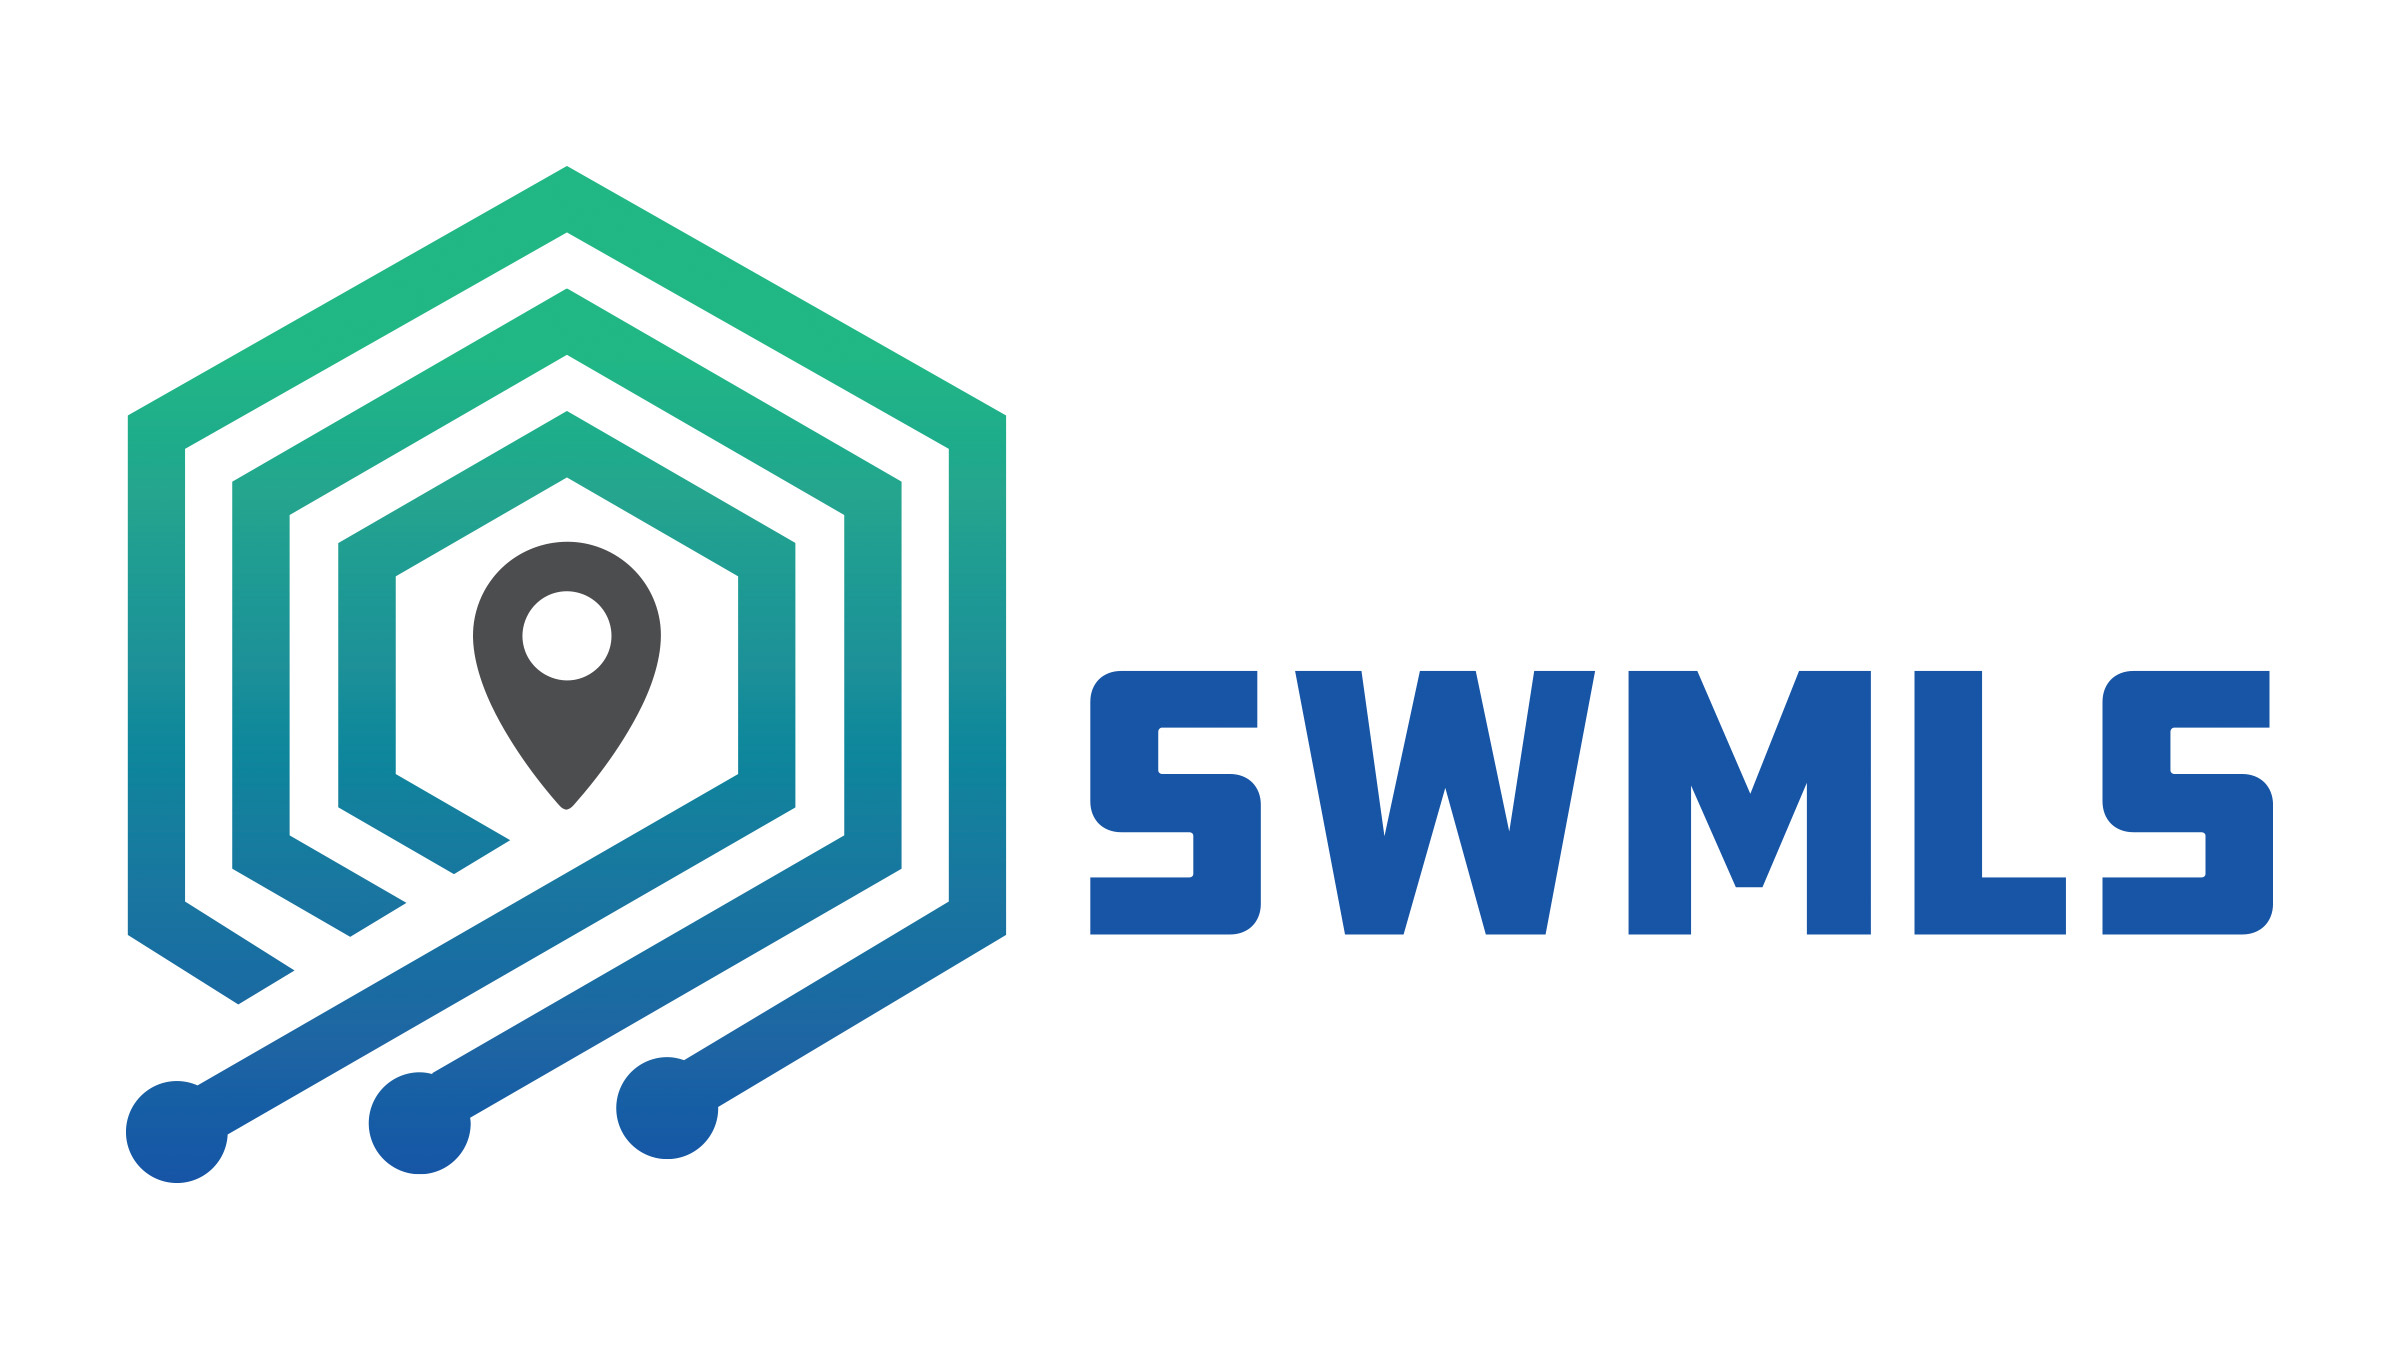 SWMLS on Zillow acquiring ShowingTime